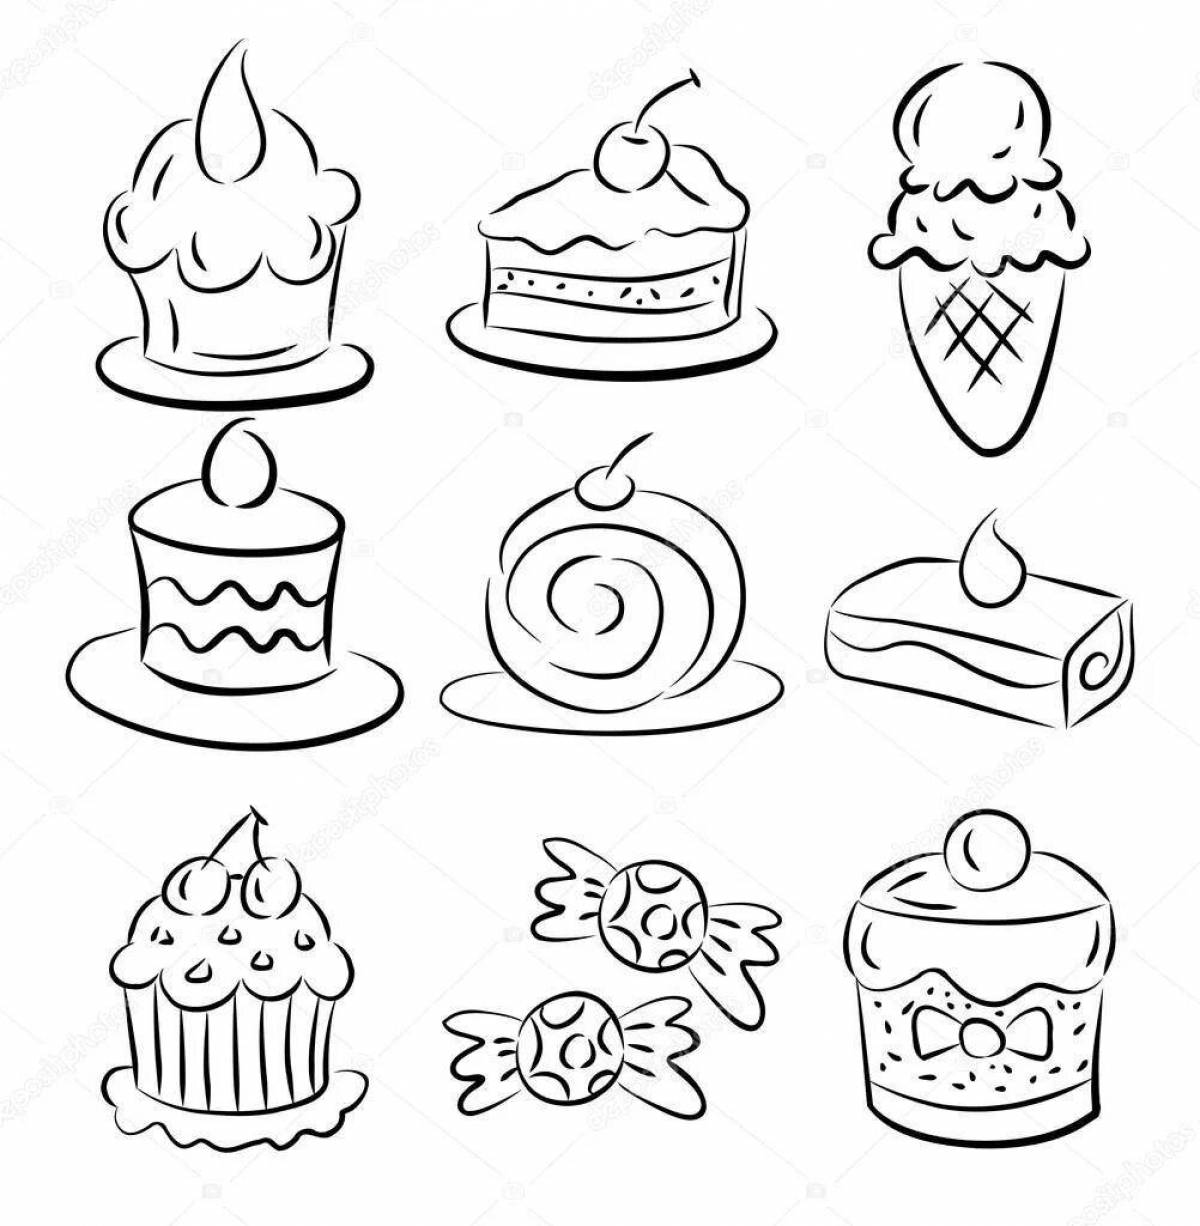 Delightful bakery coloring book